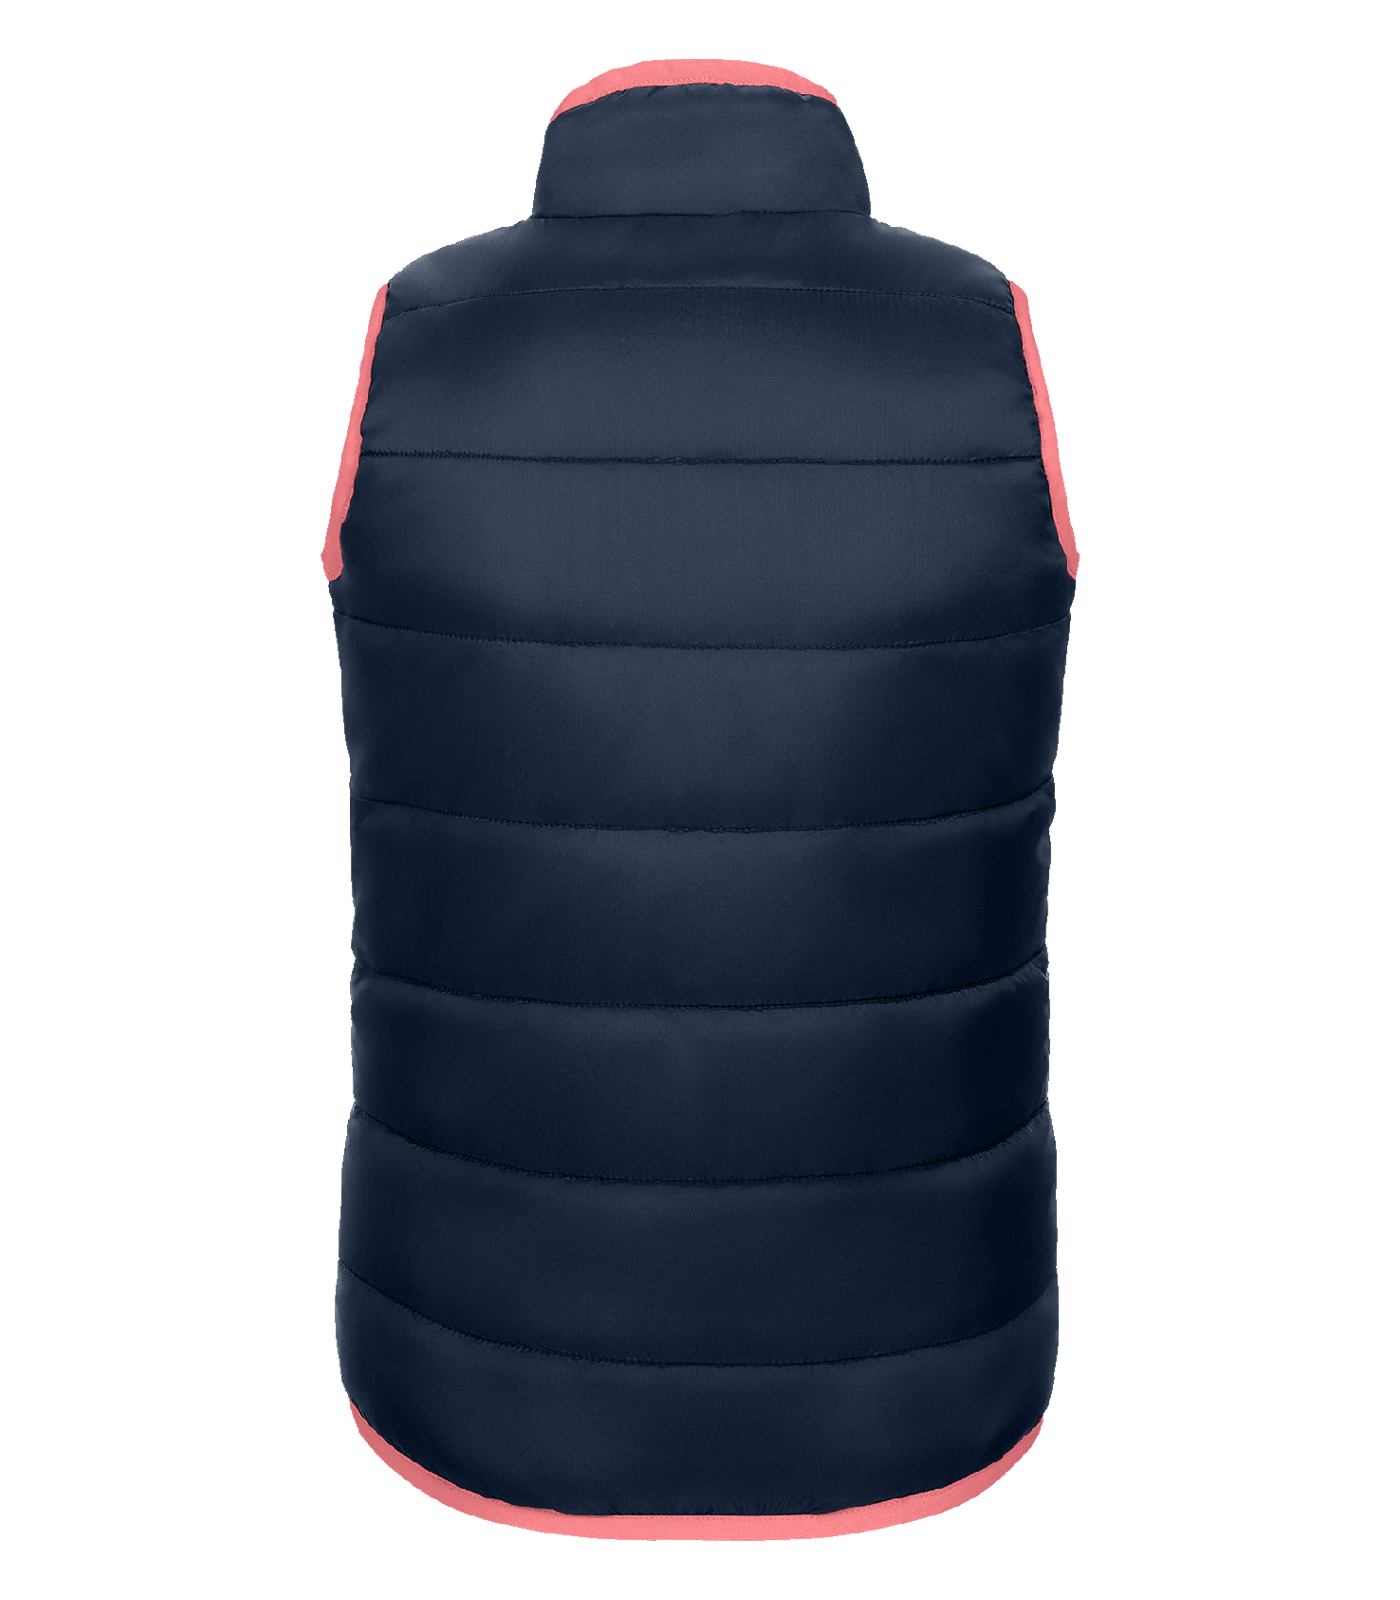 Lucky Lou Quilted Gilet, kids